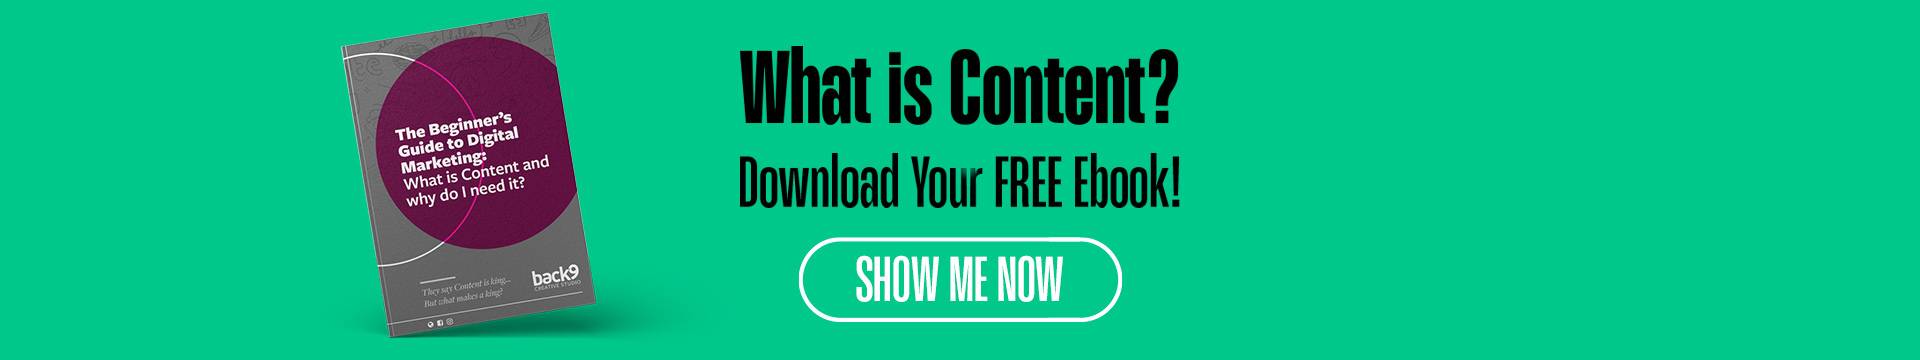 Banner-with-a-button-to-download-a-free-ebook-on-what-is-content